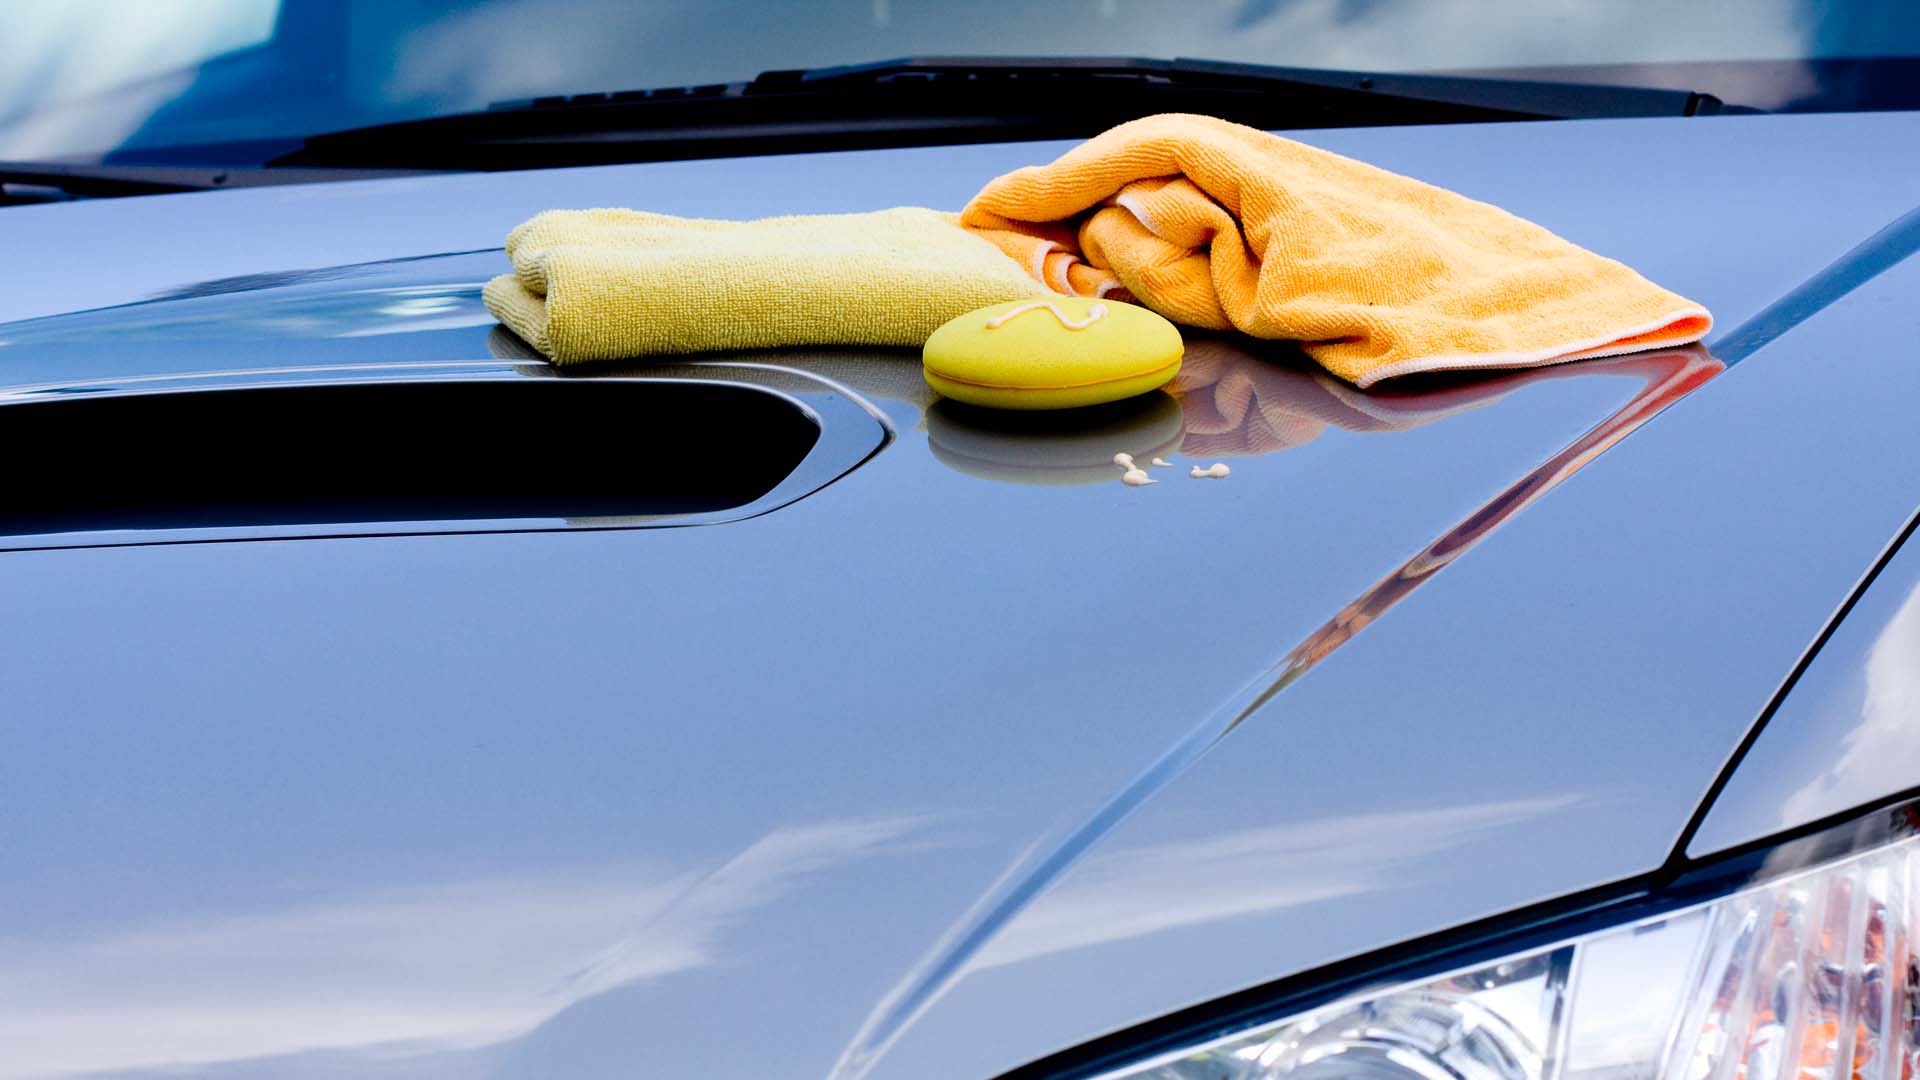 Top 5 Ways to Keep Your Car Clean and Organized - Mobile Detailing